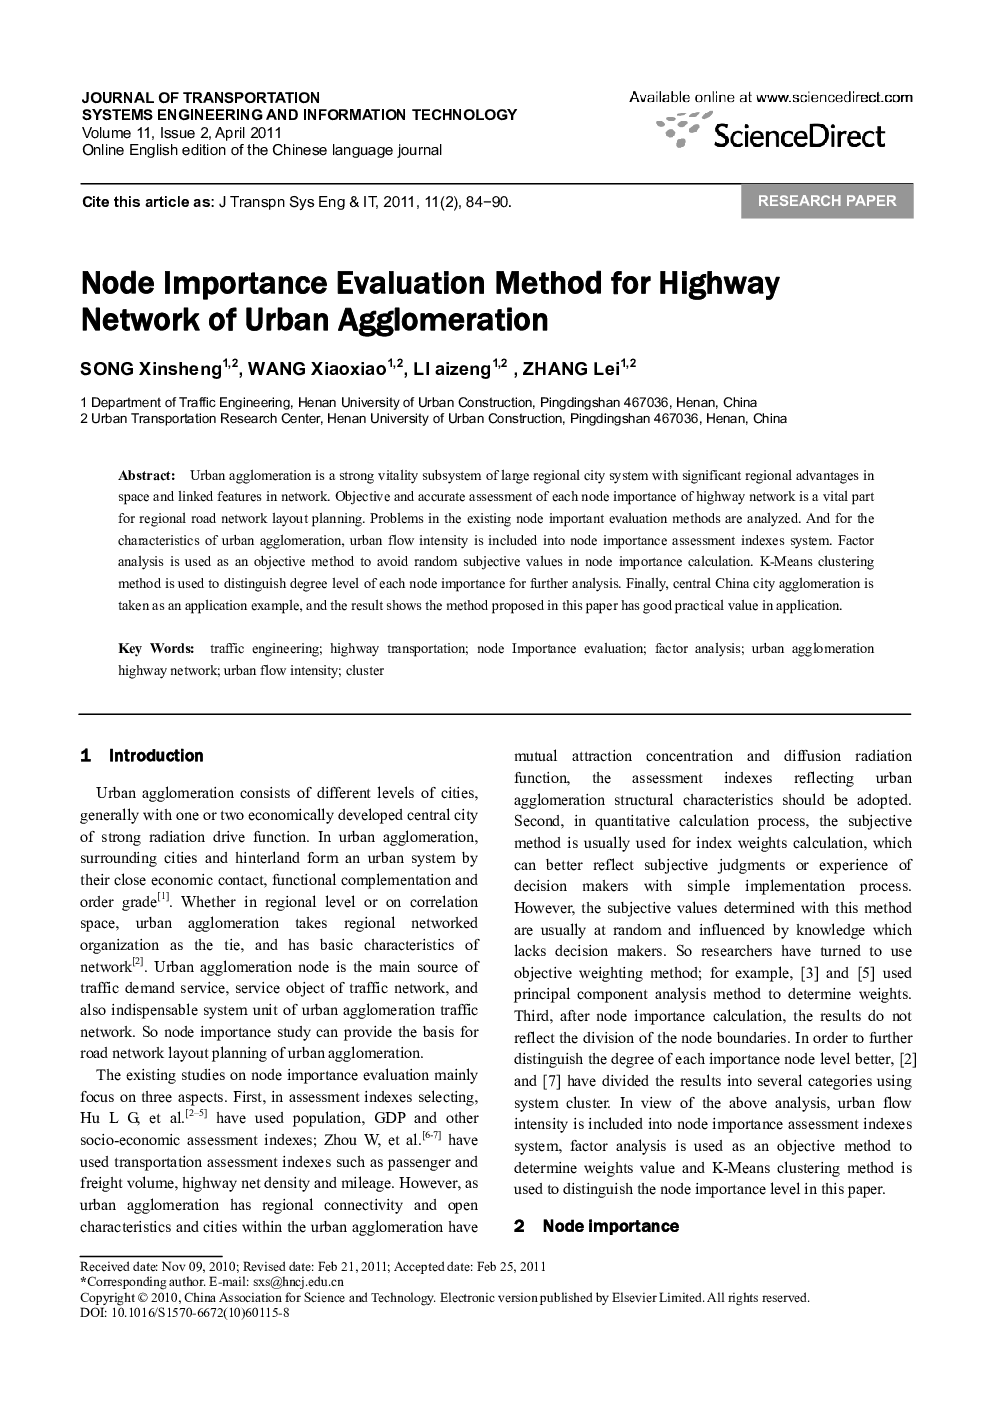 Node Importance Evaluation Method for Highway Network of Urban Agglomeration